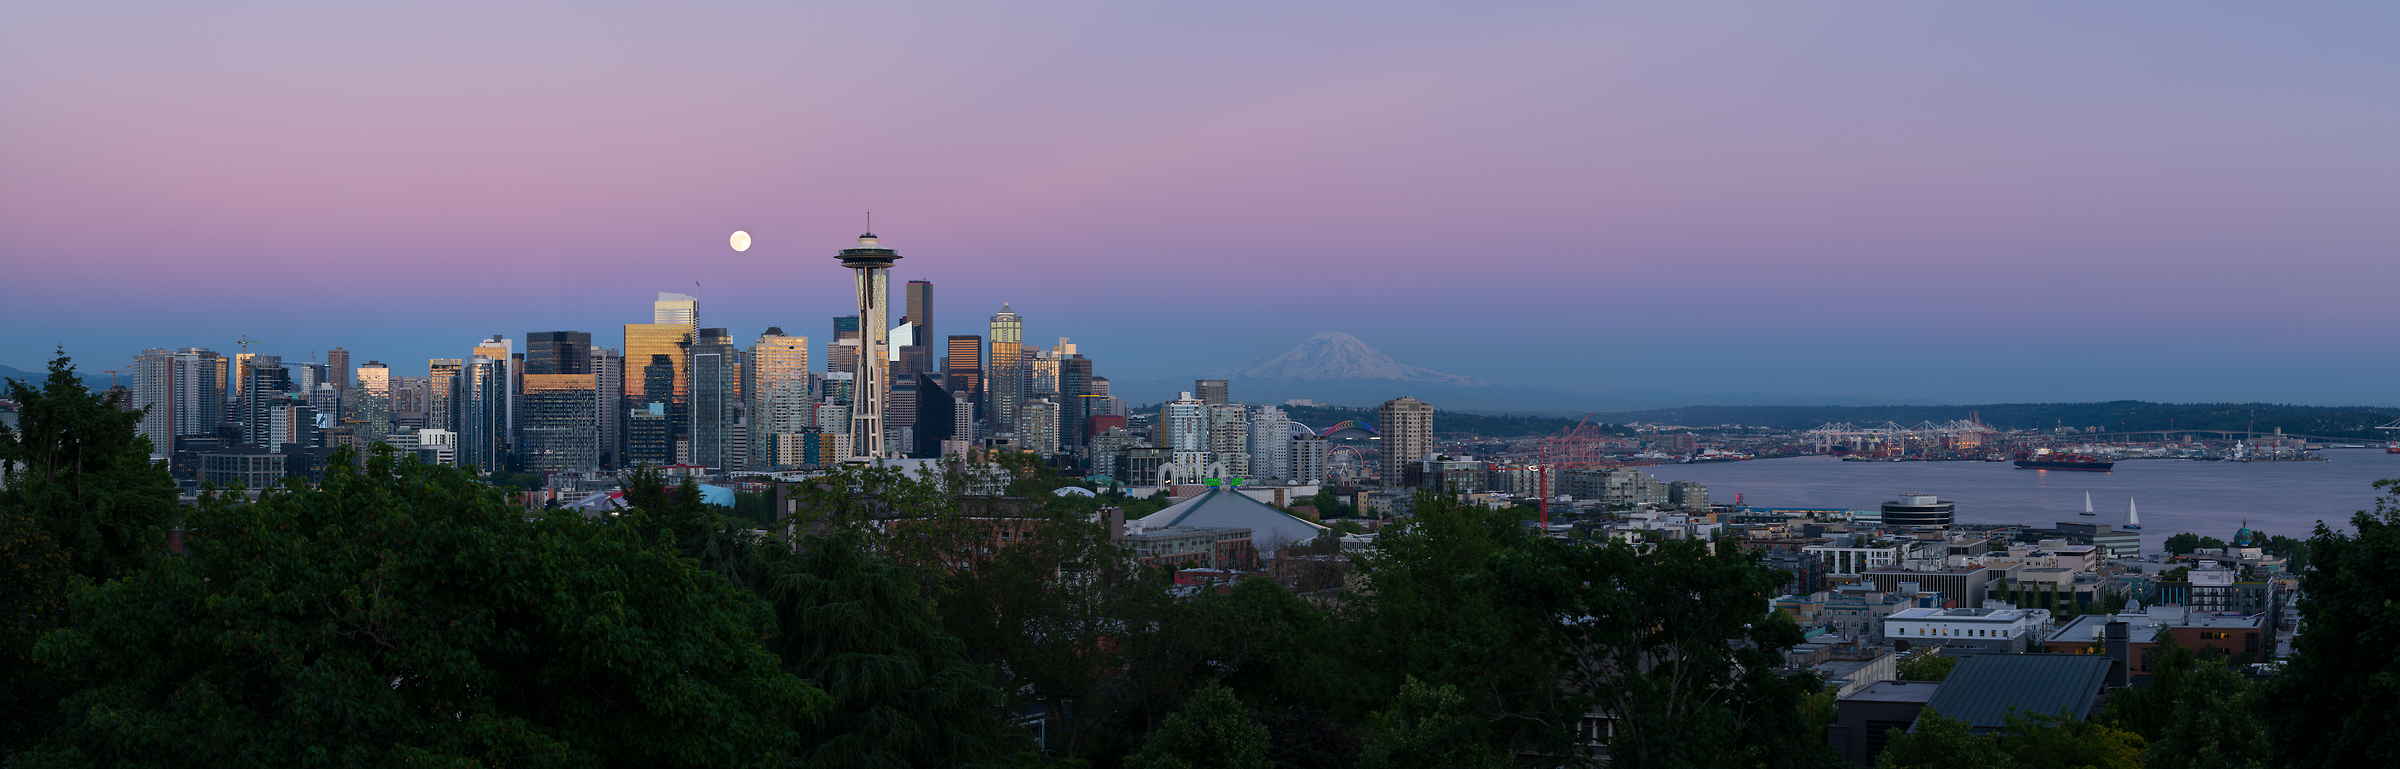 364 megapixels! A very high resolution, large-format VAST photo print of the Seattle skyline at dusk with the moon and Mt. Rainier in the background; photograph created by Greg Probst in Seattle, WA